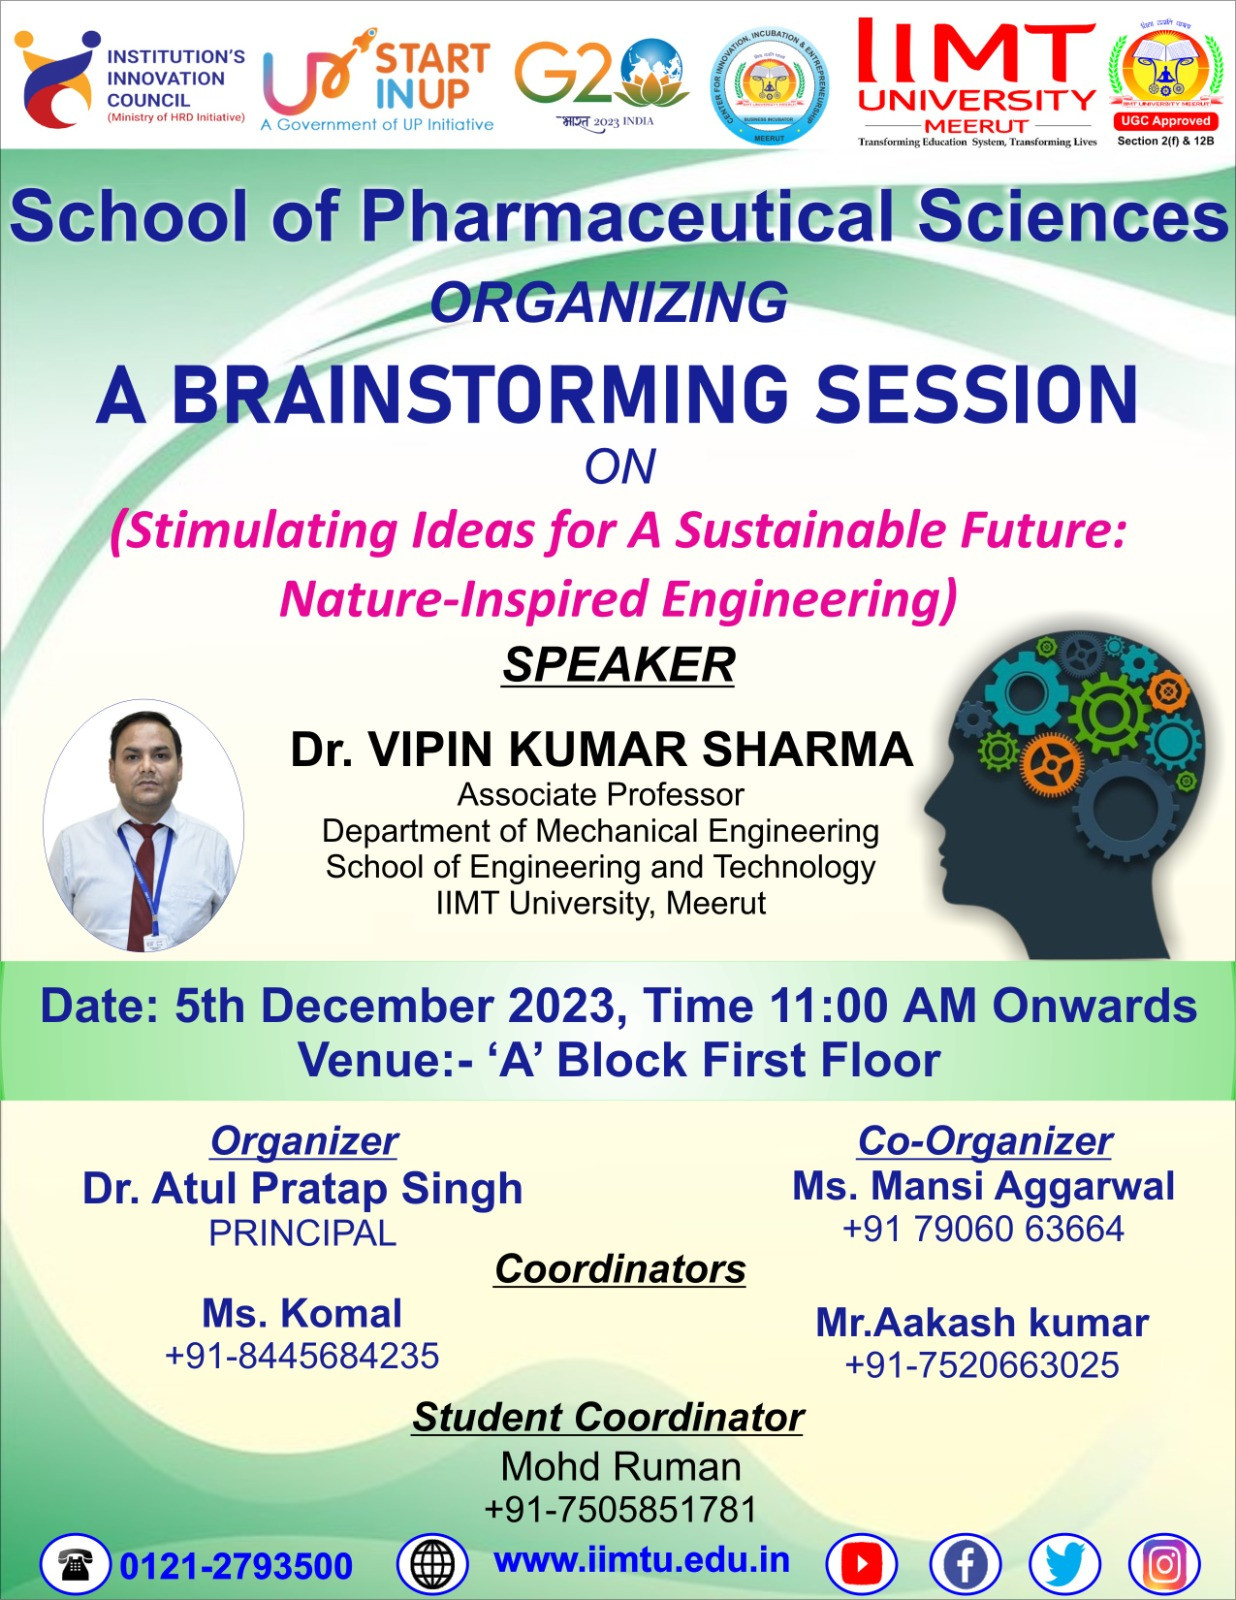 IIMT University School of Pharmaceutical Sciences: Nature-Inspired Engineering for a Sustainable Future